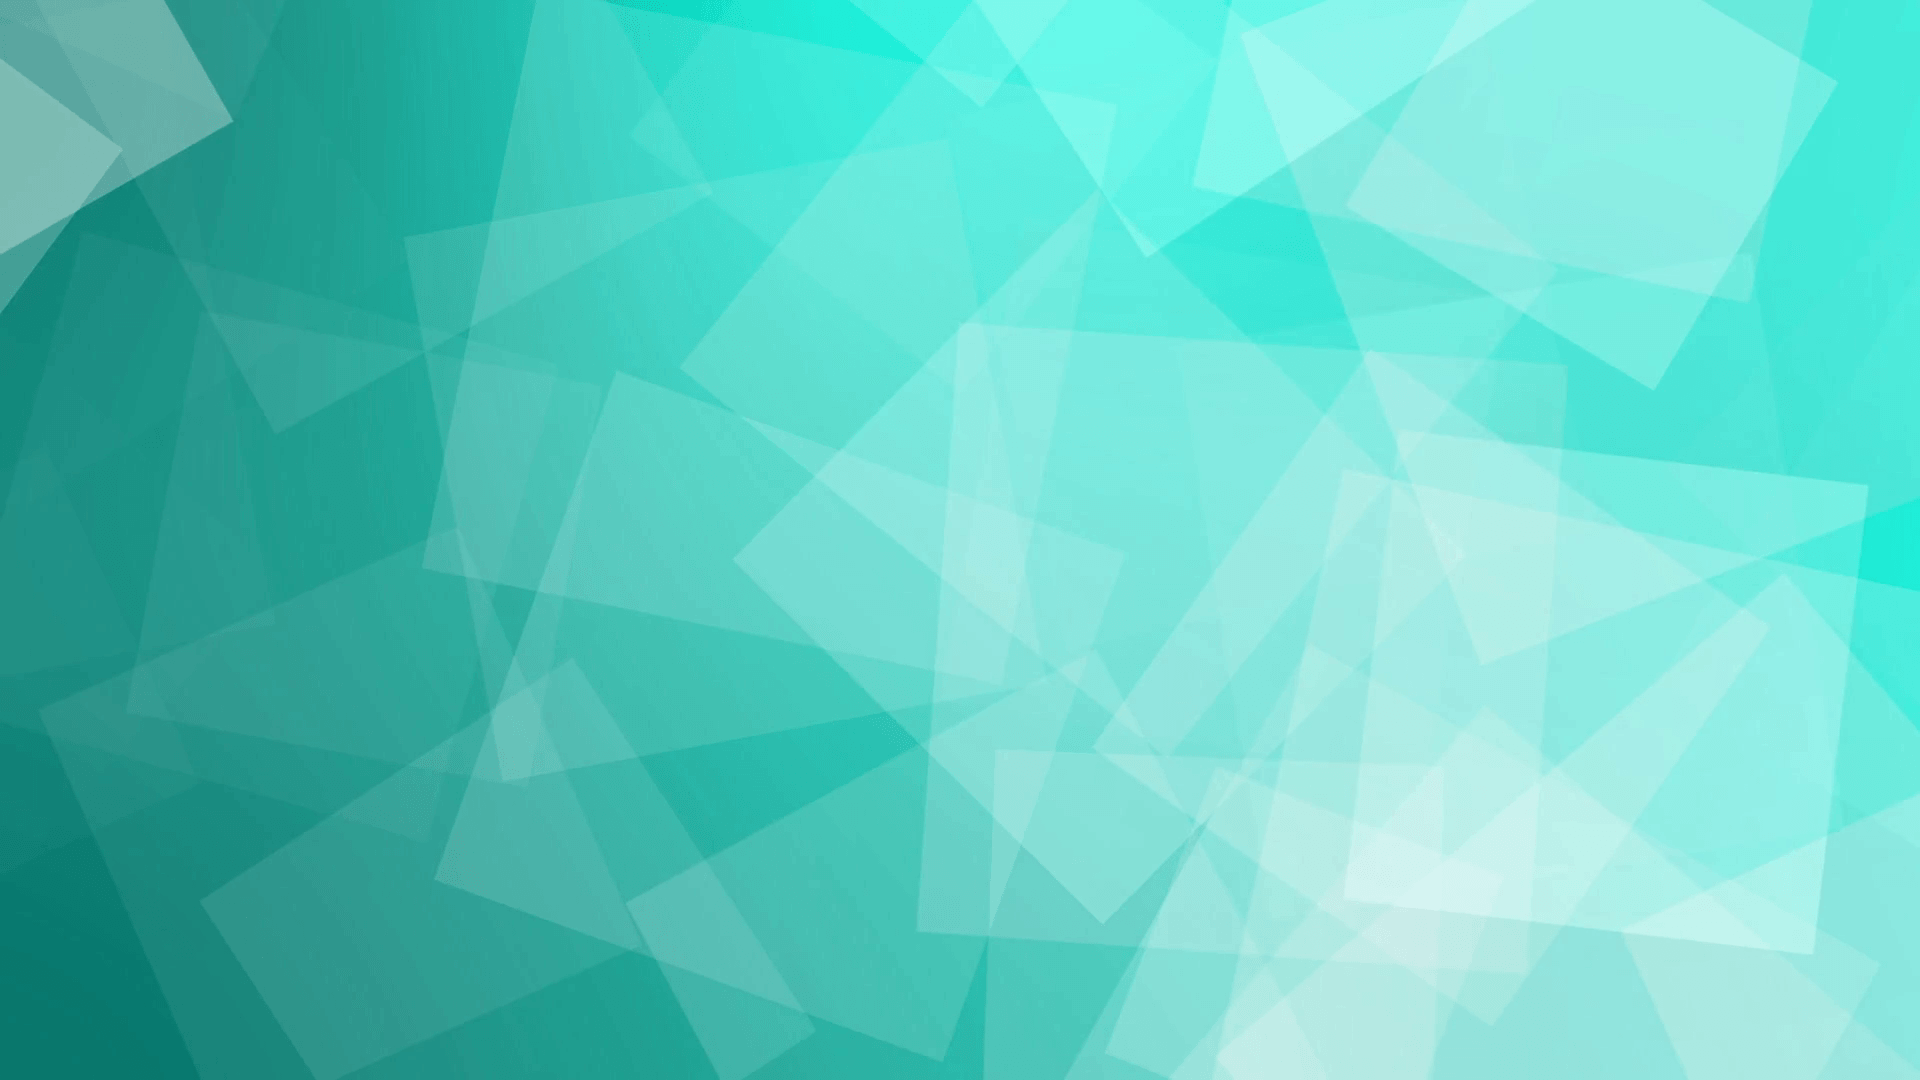 Simple animated geometric background with squares. 4K Ultra High